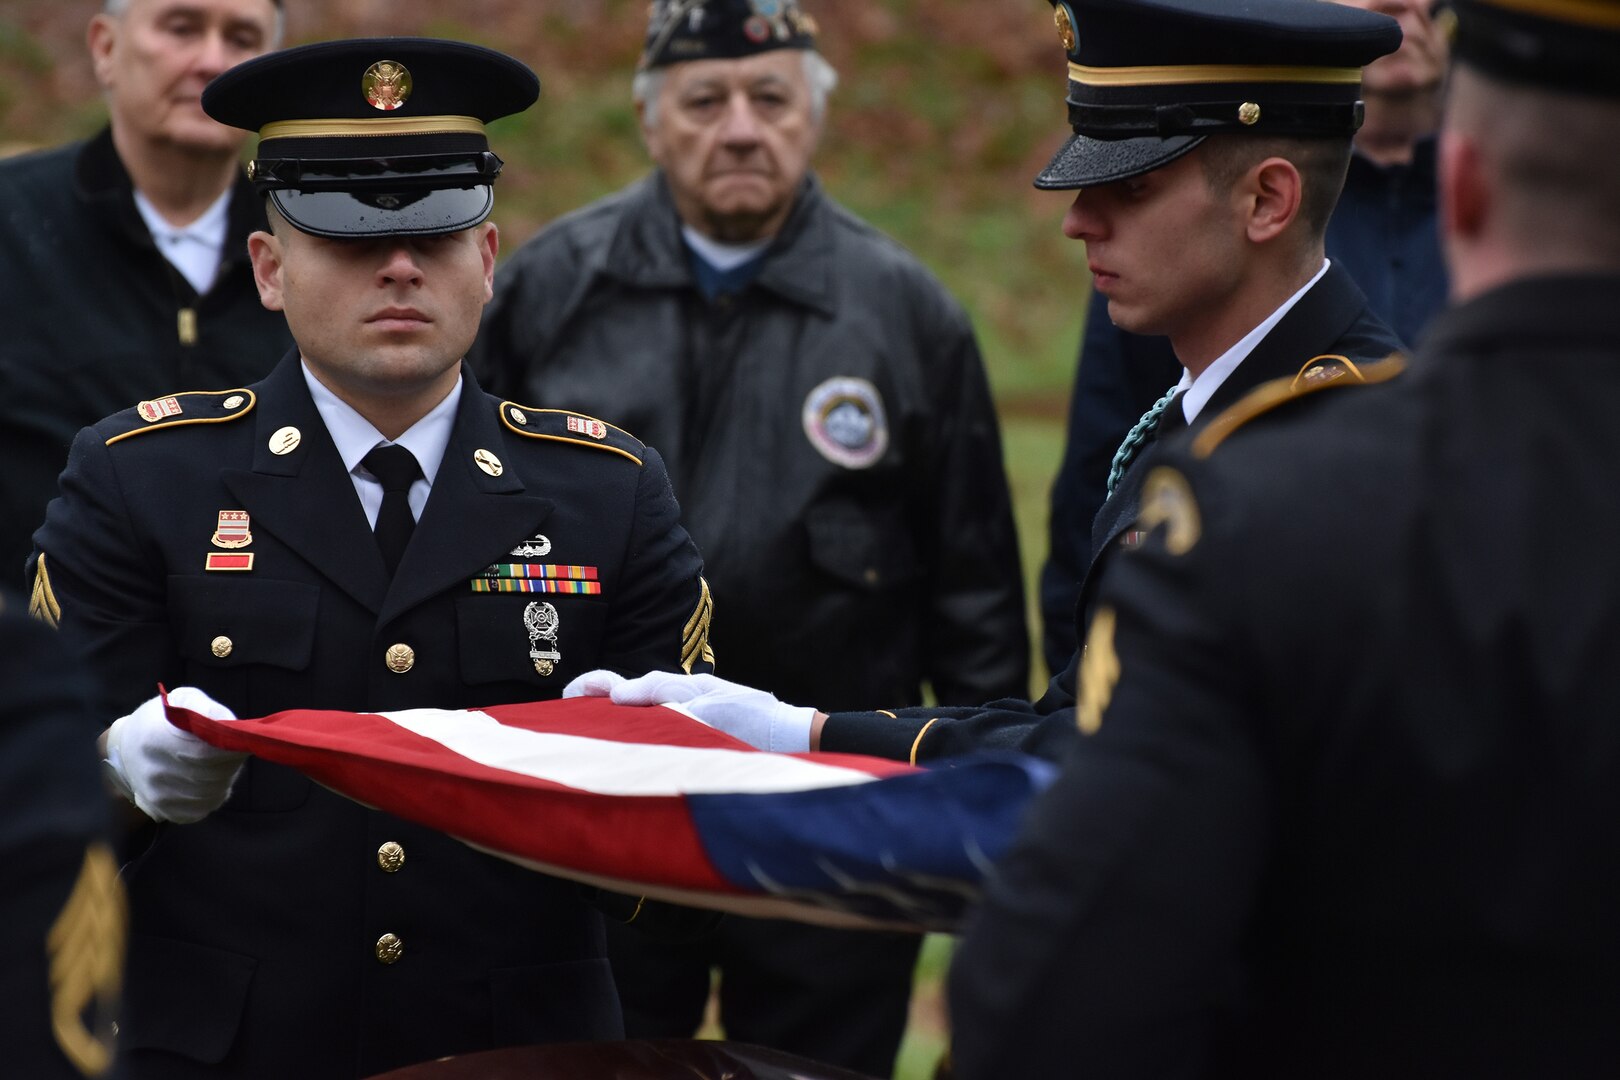 New York Army National Guard Soldiers in the Honor Guard fold the U.S. flag during a funeral service for Pfc. John Martin in Schuylerville, N.Y., Dec. 2, 2018. Martin had gone missing in action during the Korean War at the battle of Chosin Reservoir. His family finally received his body after 68 years as listed missing.